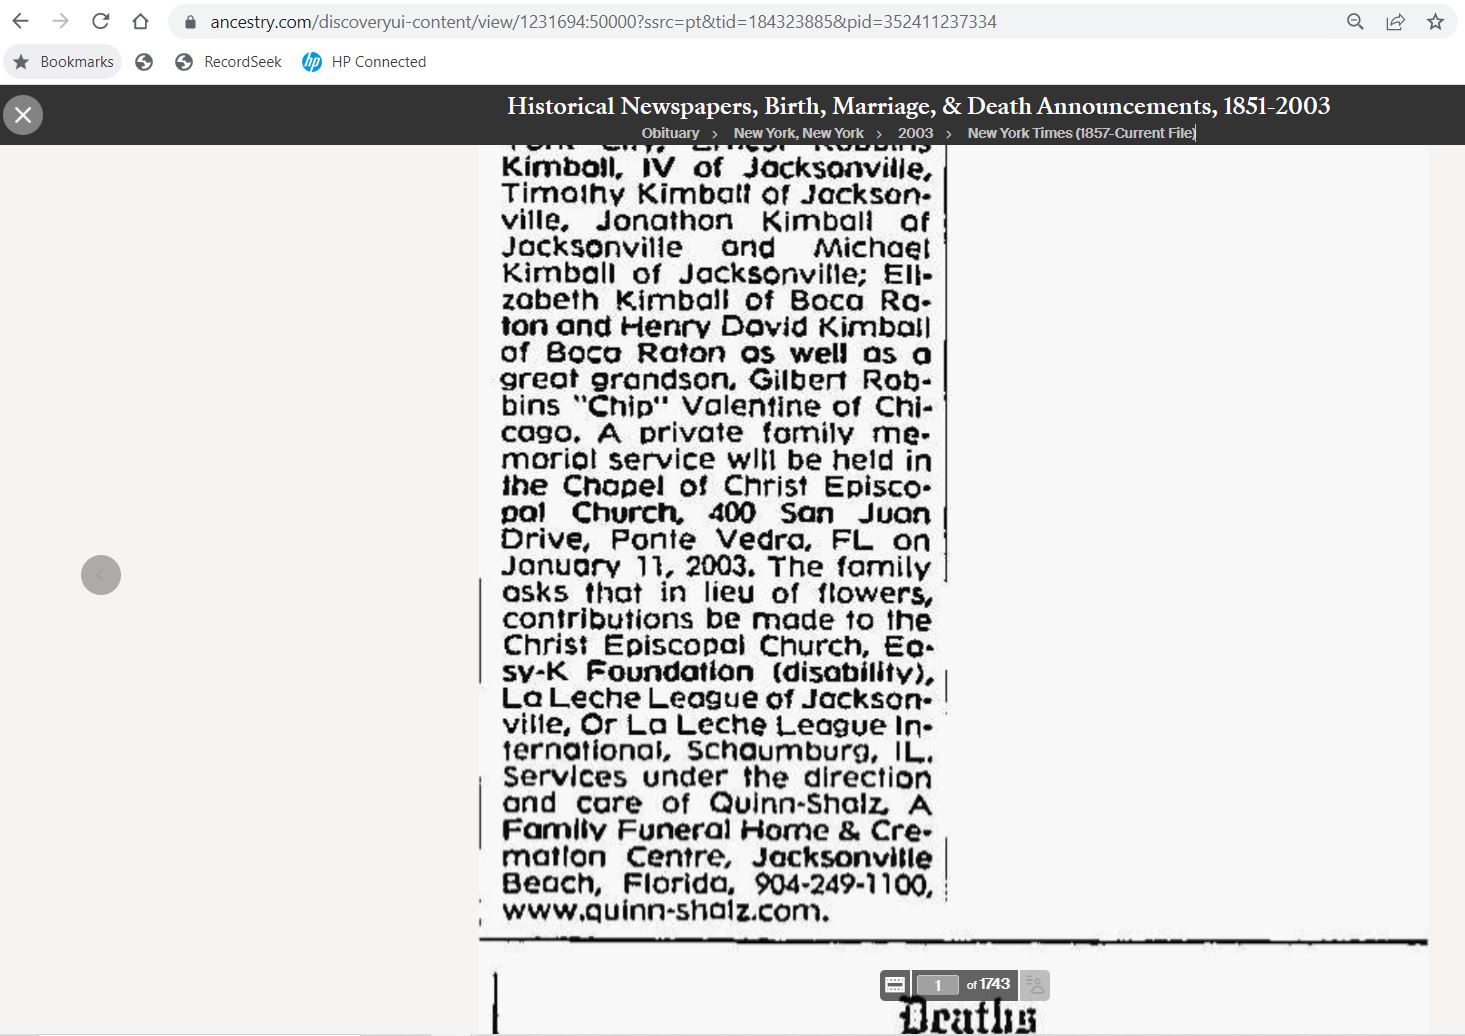 Historical Newspapers, Birth, Marriage, &amp; Death Announcements, 1851-2003 View Image after bread crumb change screen capture